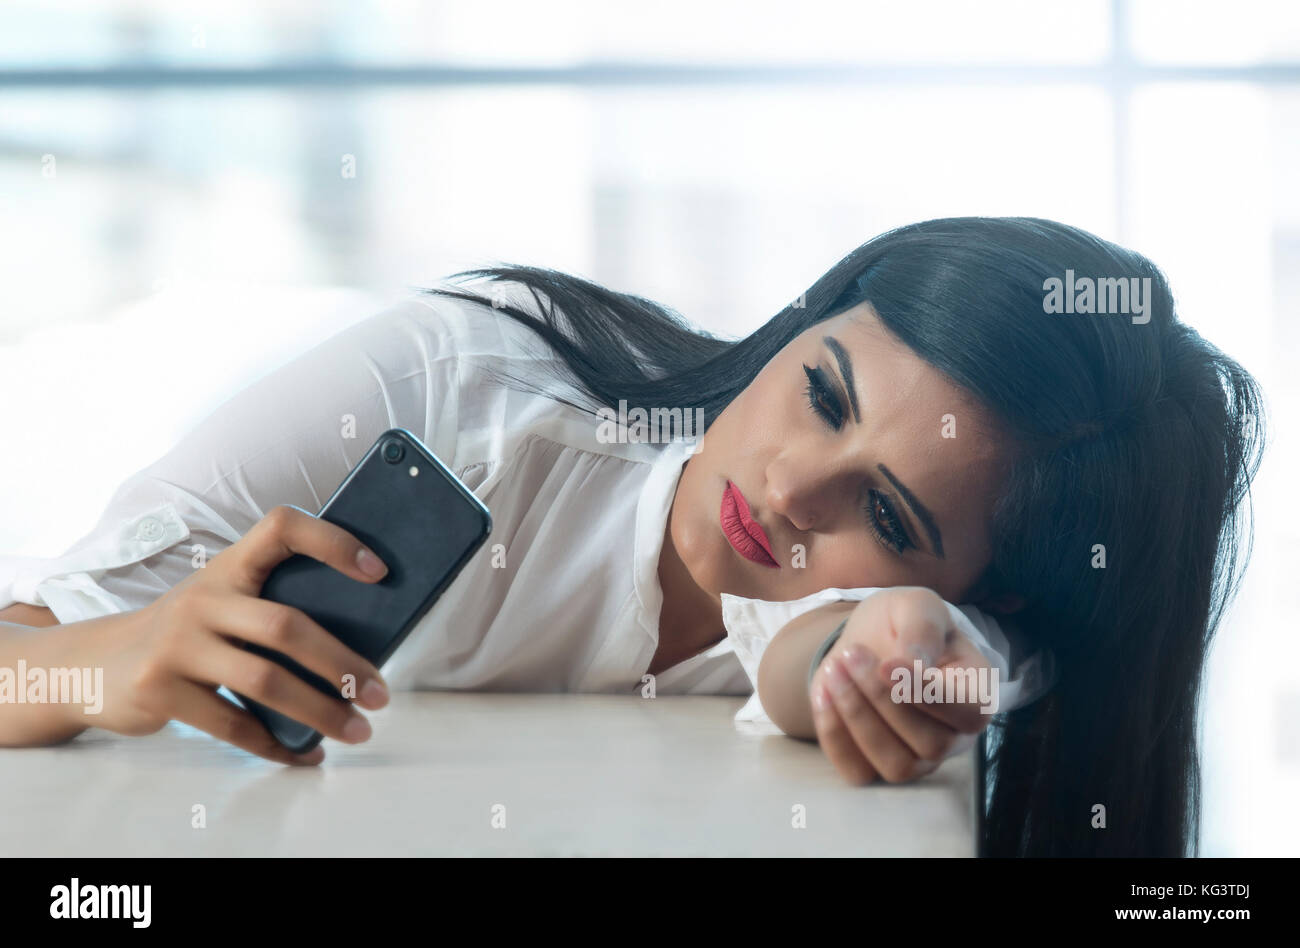 Businesswoman leaning on table et using mobile phone Banque D'Images